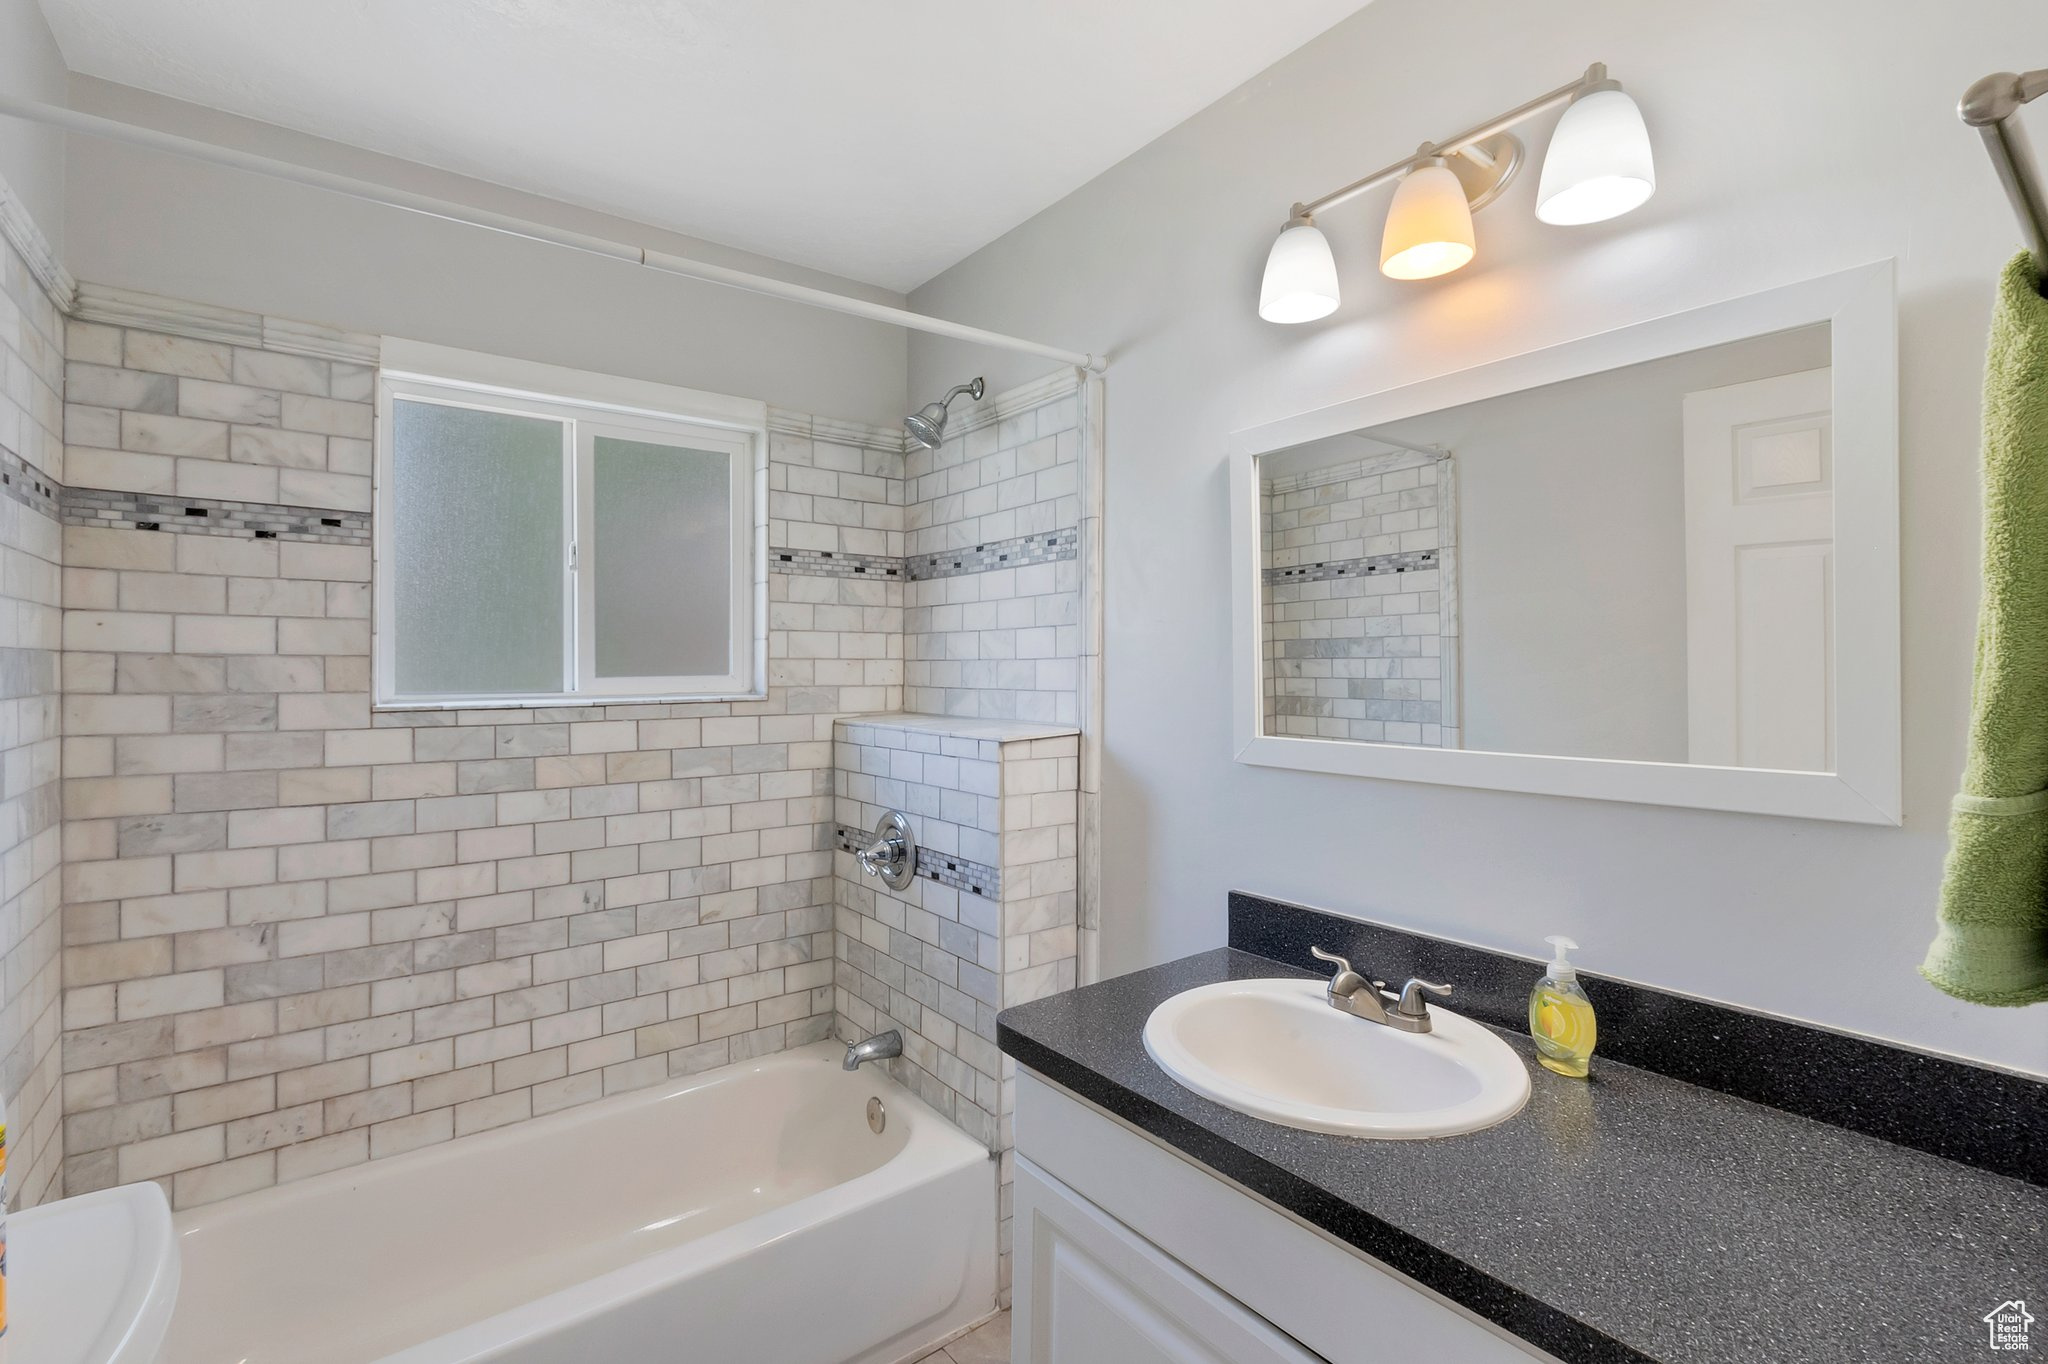 Full bathroom with vanity, toilet, and tiled shower / bath combo